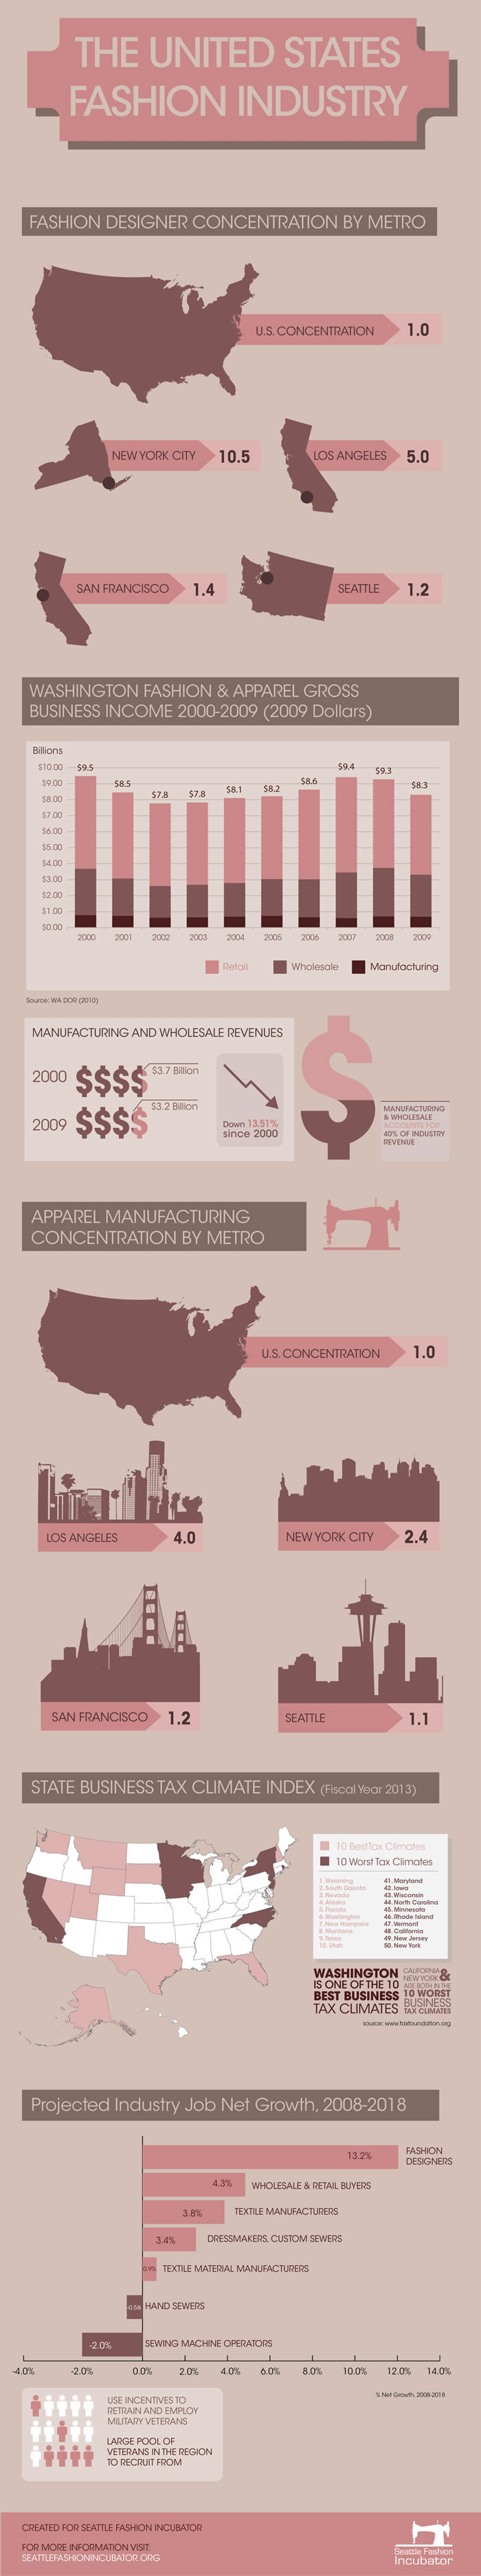 The United States Fashion Industry